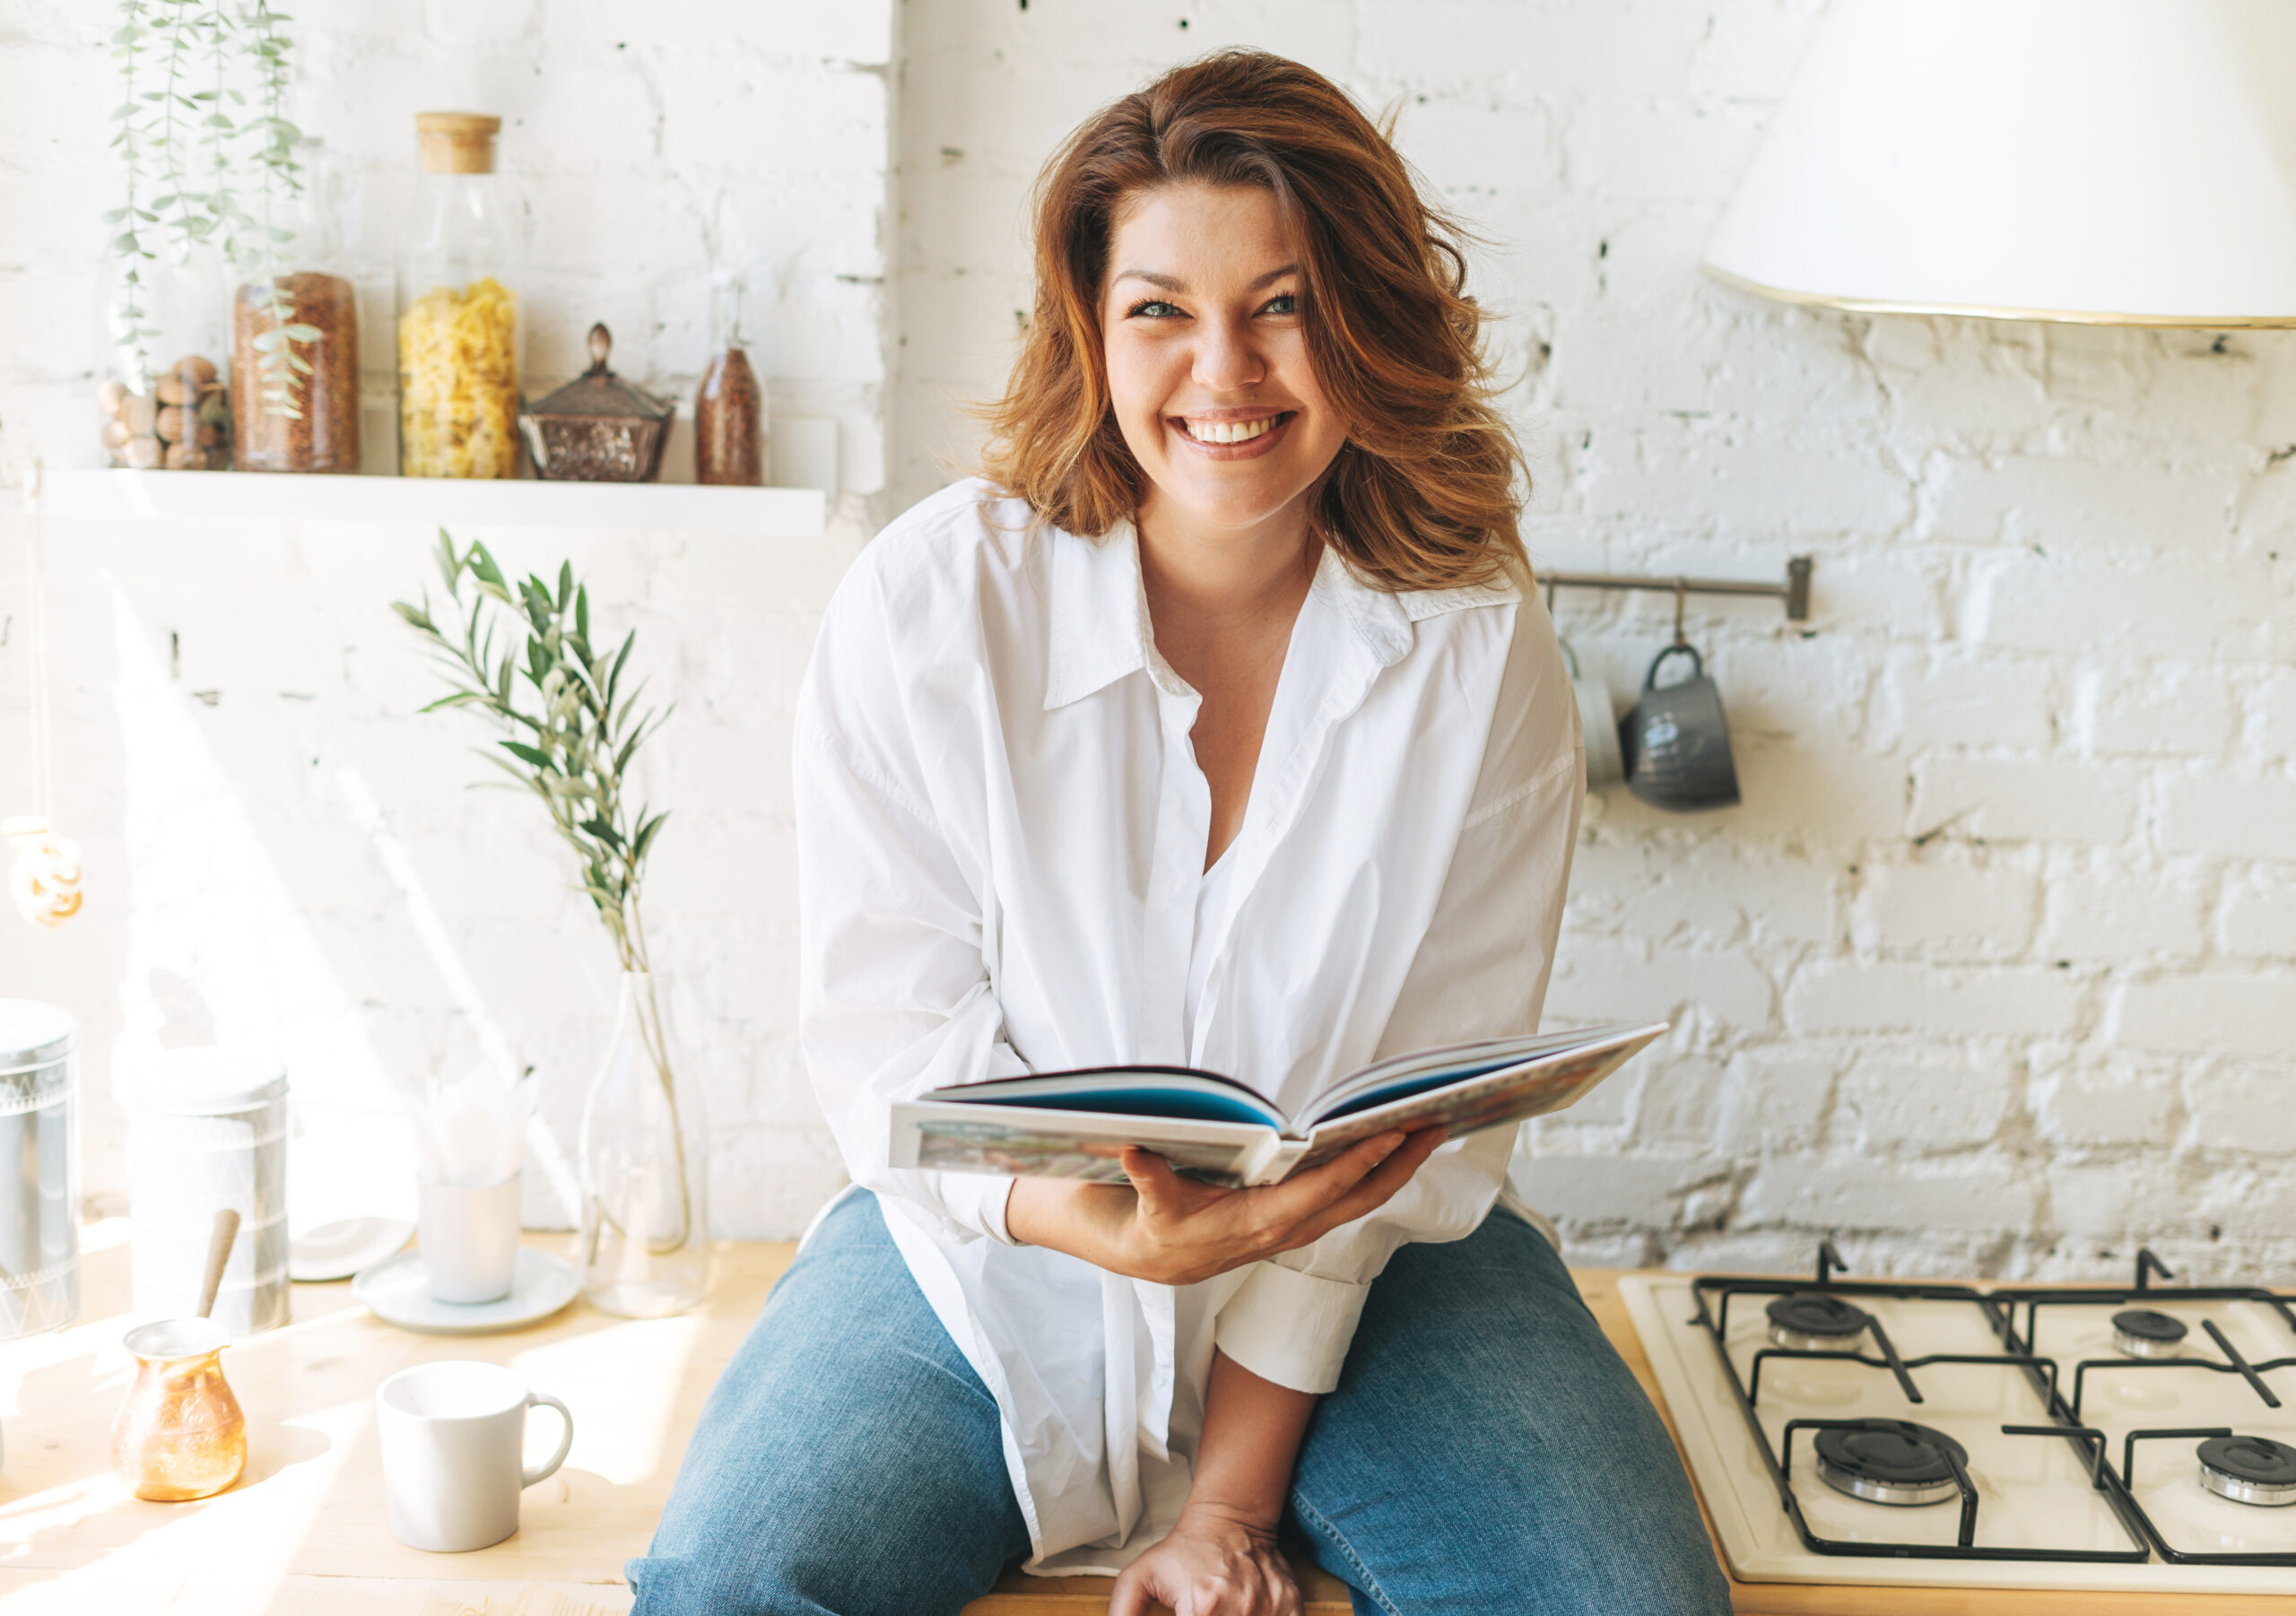 Healthy woman smiling in kitchen smiling